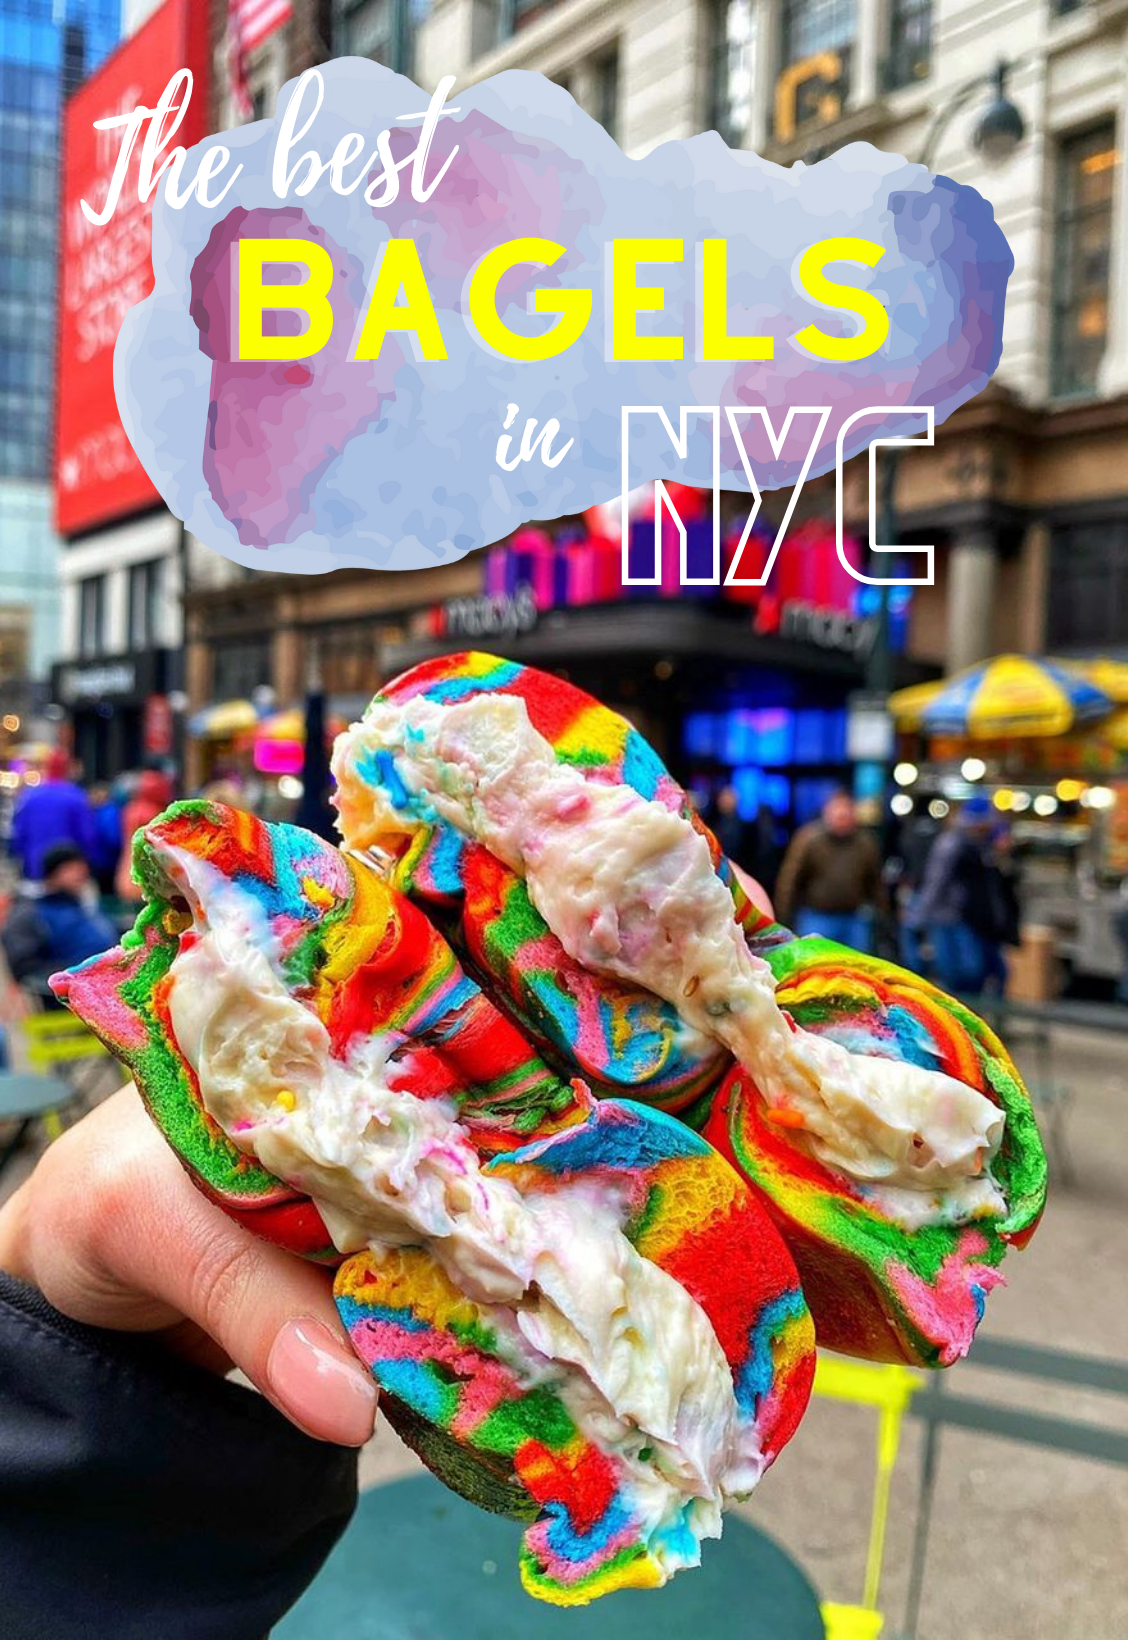 The best bagels in NYC